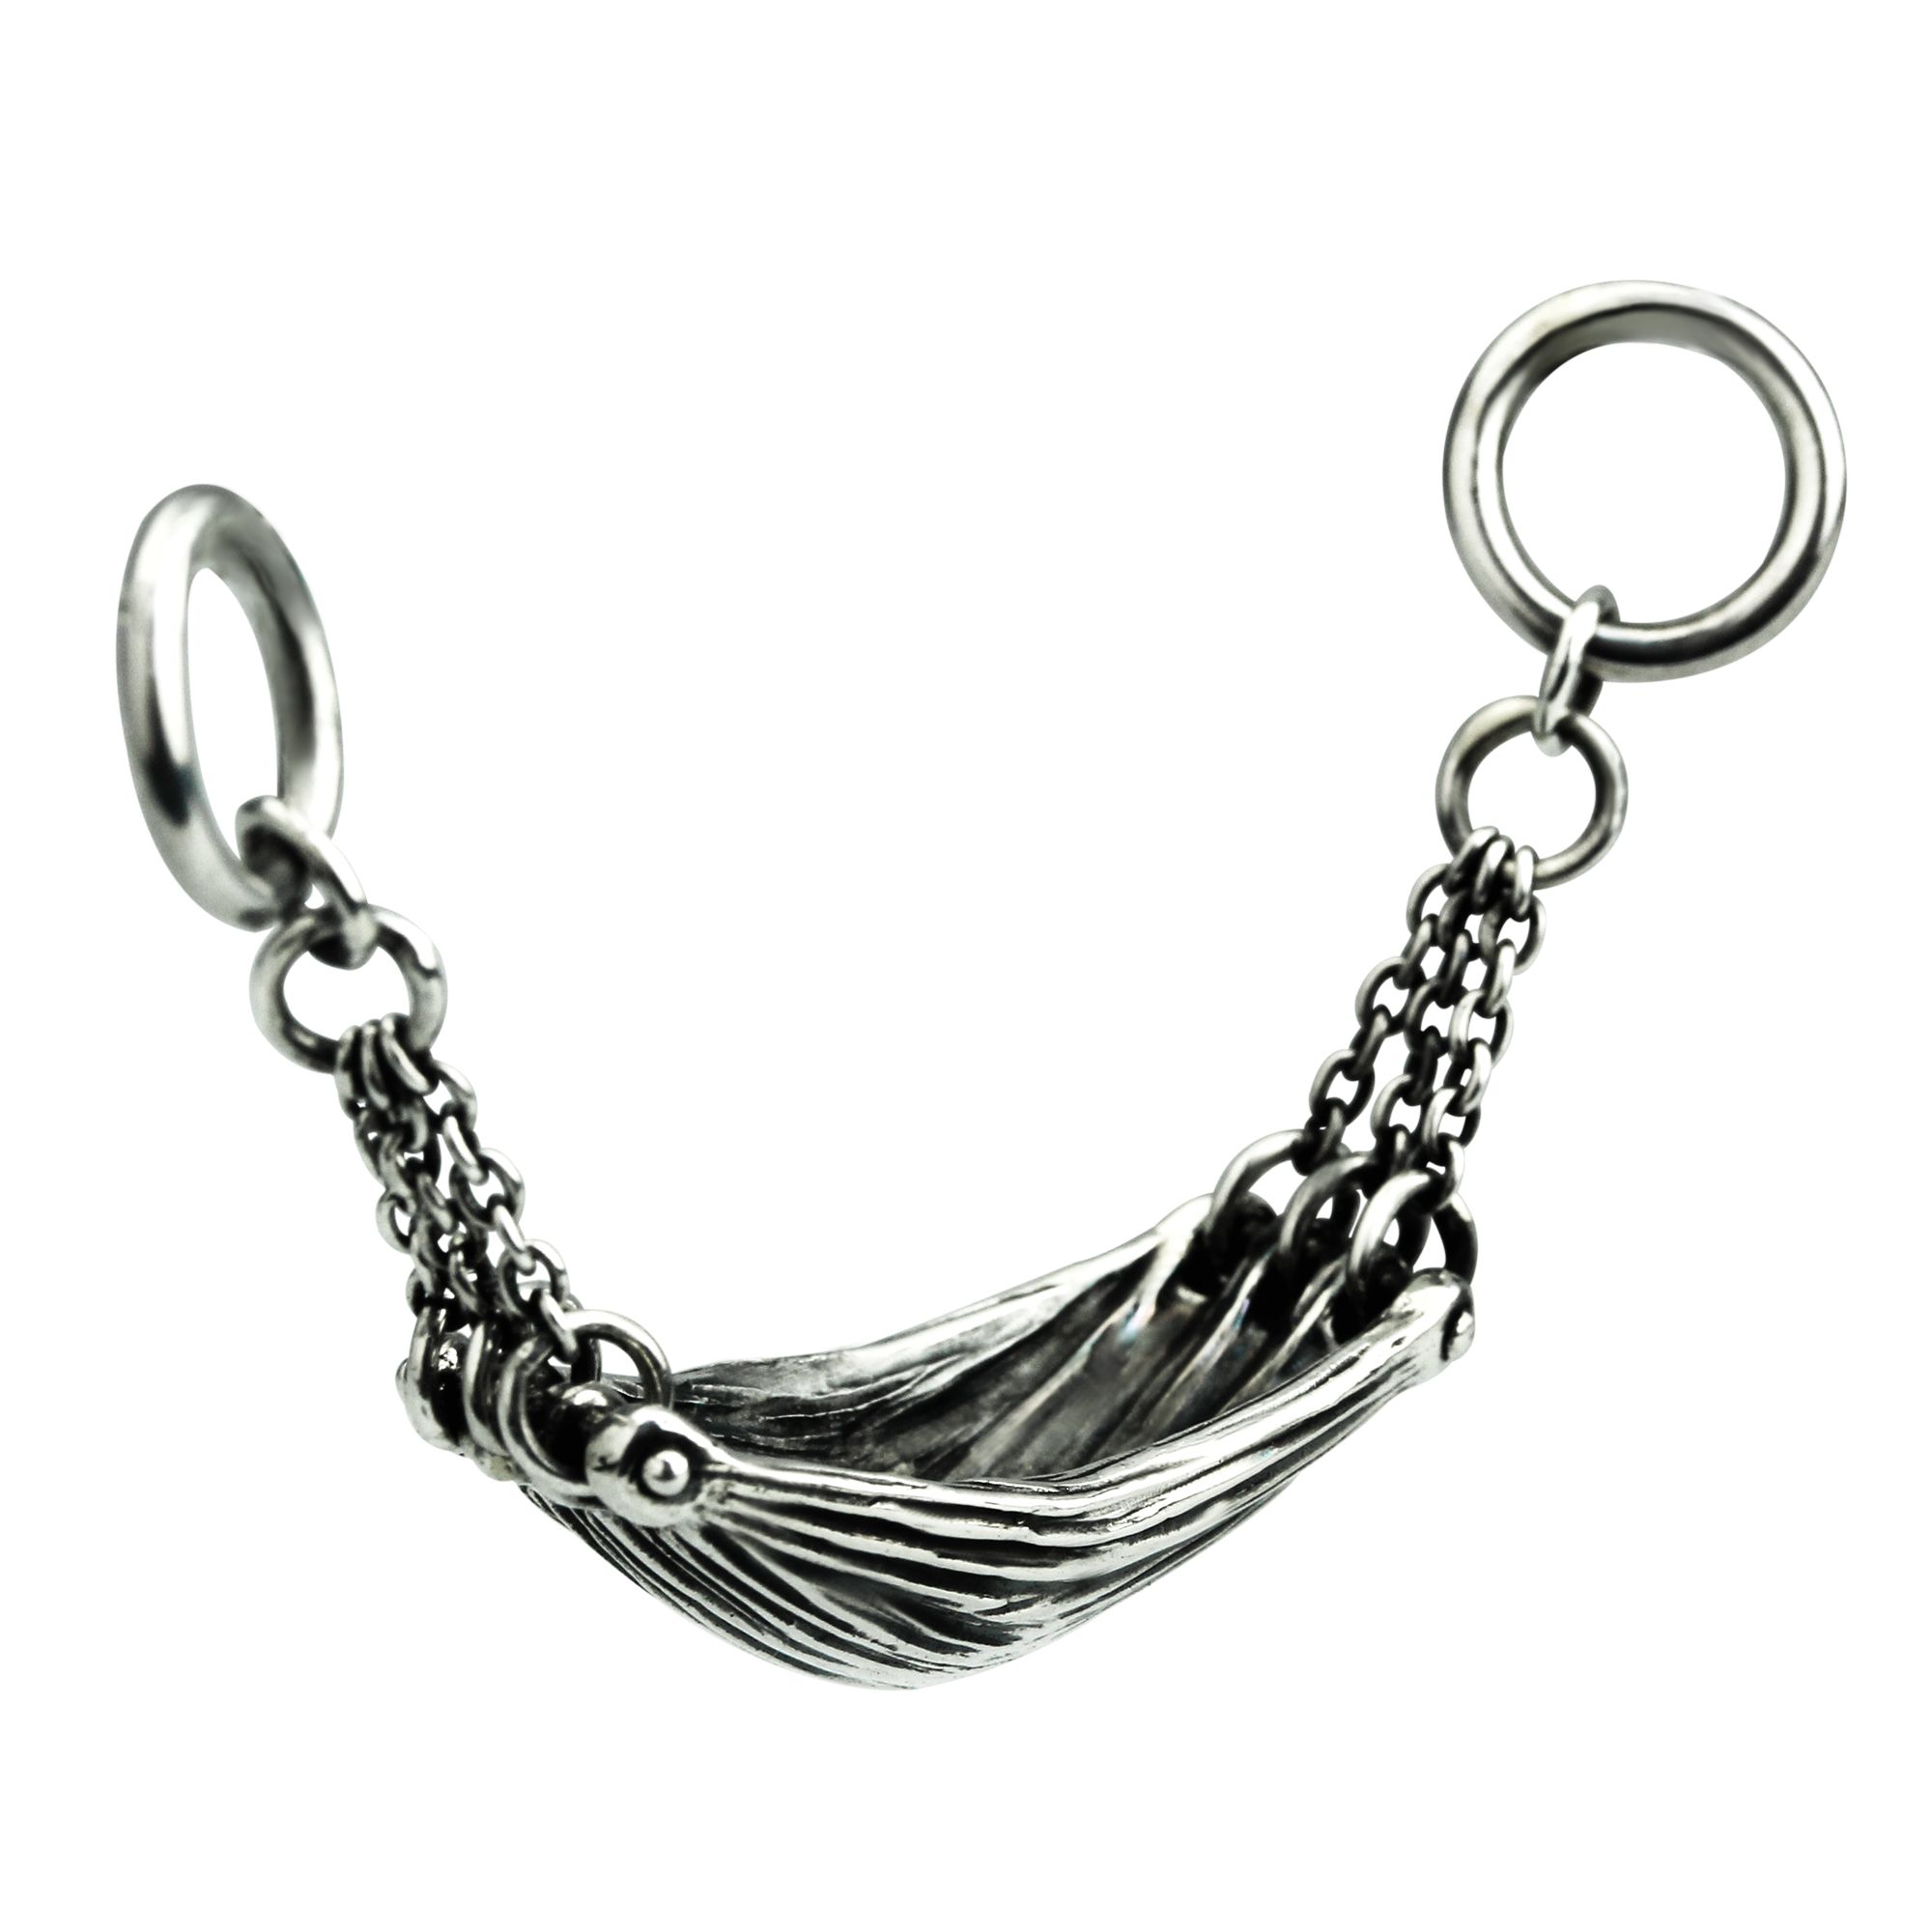 Chill OHM Beads Silver 925 Charm Camping Collection เครื่องประดับ เงิน บีด